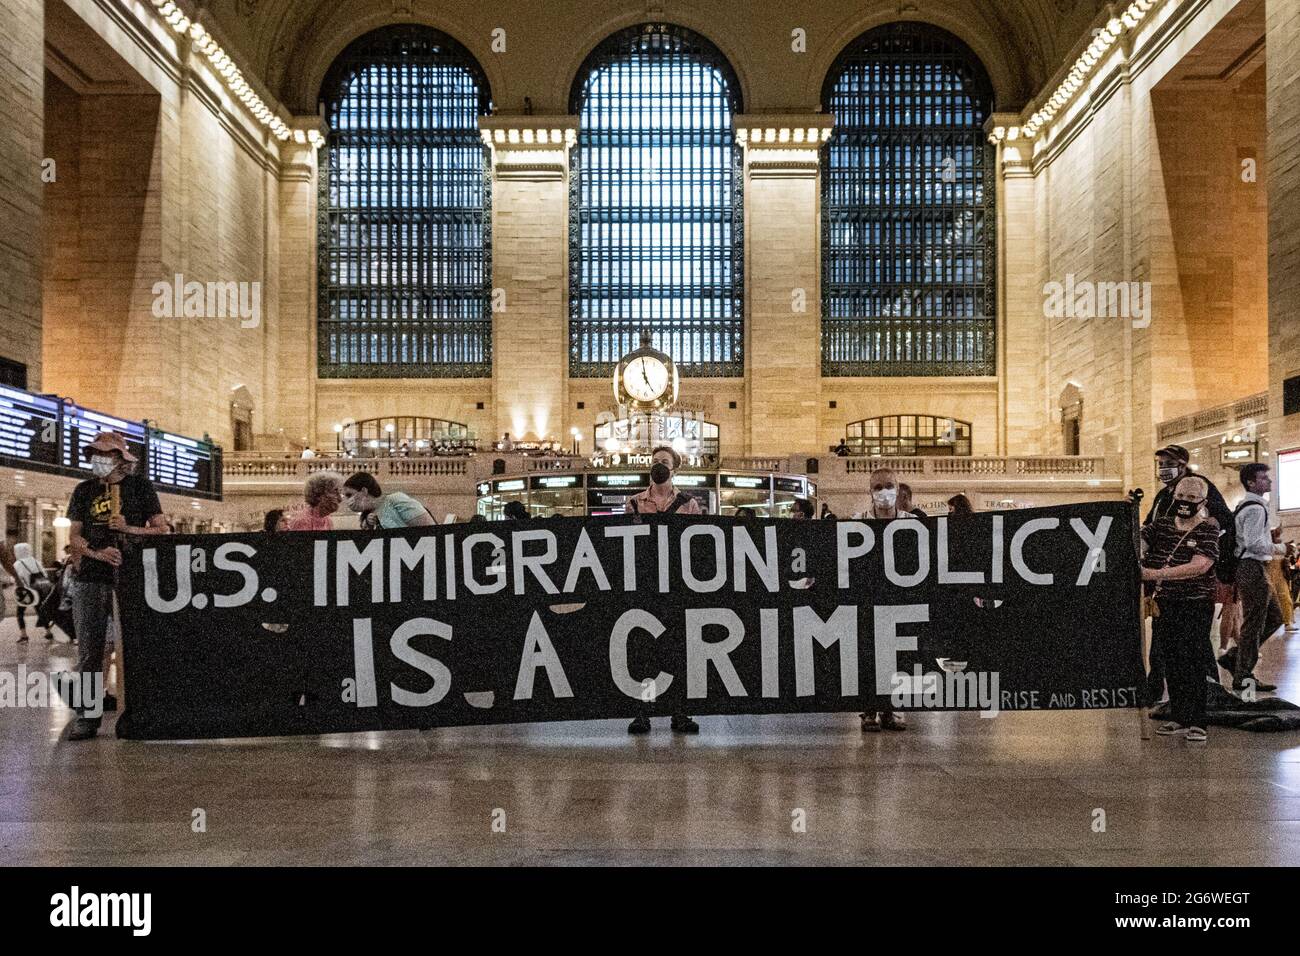 Members of the activist group Rise and Resist gathered on July 8, 2021 at the main hall in Grand Central Station for a protest demanding the Biden administration to permanently end using Title 42 exclusions to detain and deport refugees, to dismantle CBP (Customs and Border Patrol) and ICE (Immigration and Customs Enforcement), and to create a path to citizenship for all. (Photo by Erik McGregor/Sipa USA) Stock Photo